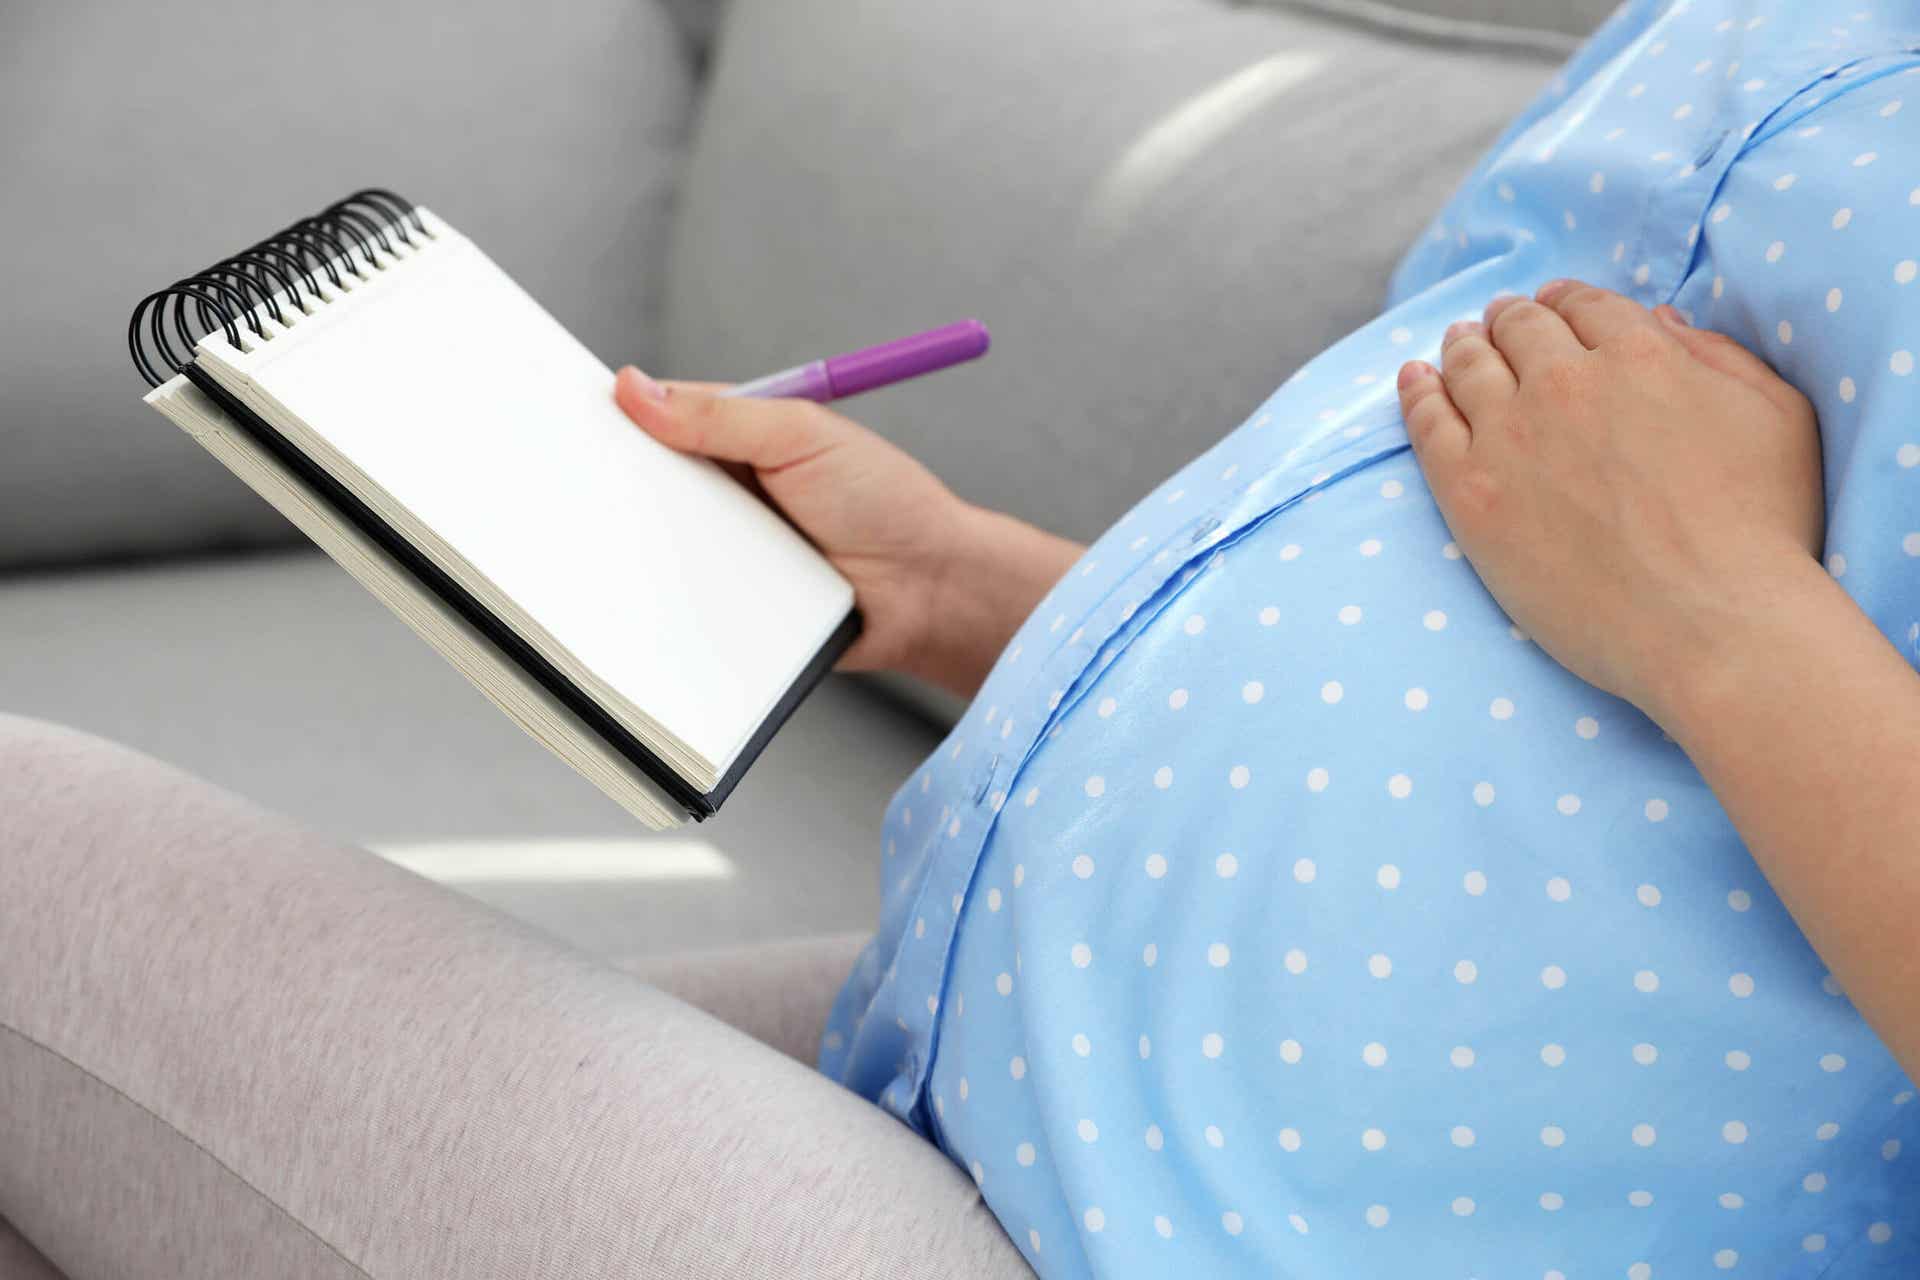 A pregnant woman toughing her belly with one hand, and holding a pen and notebook in the other hand.